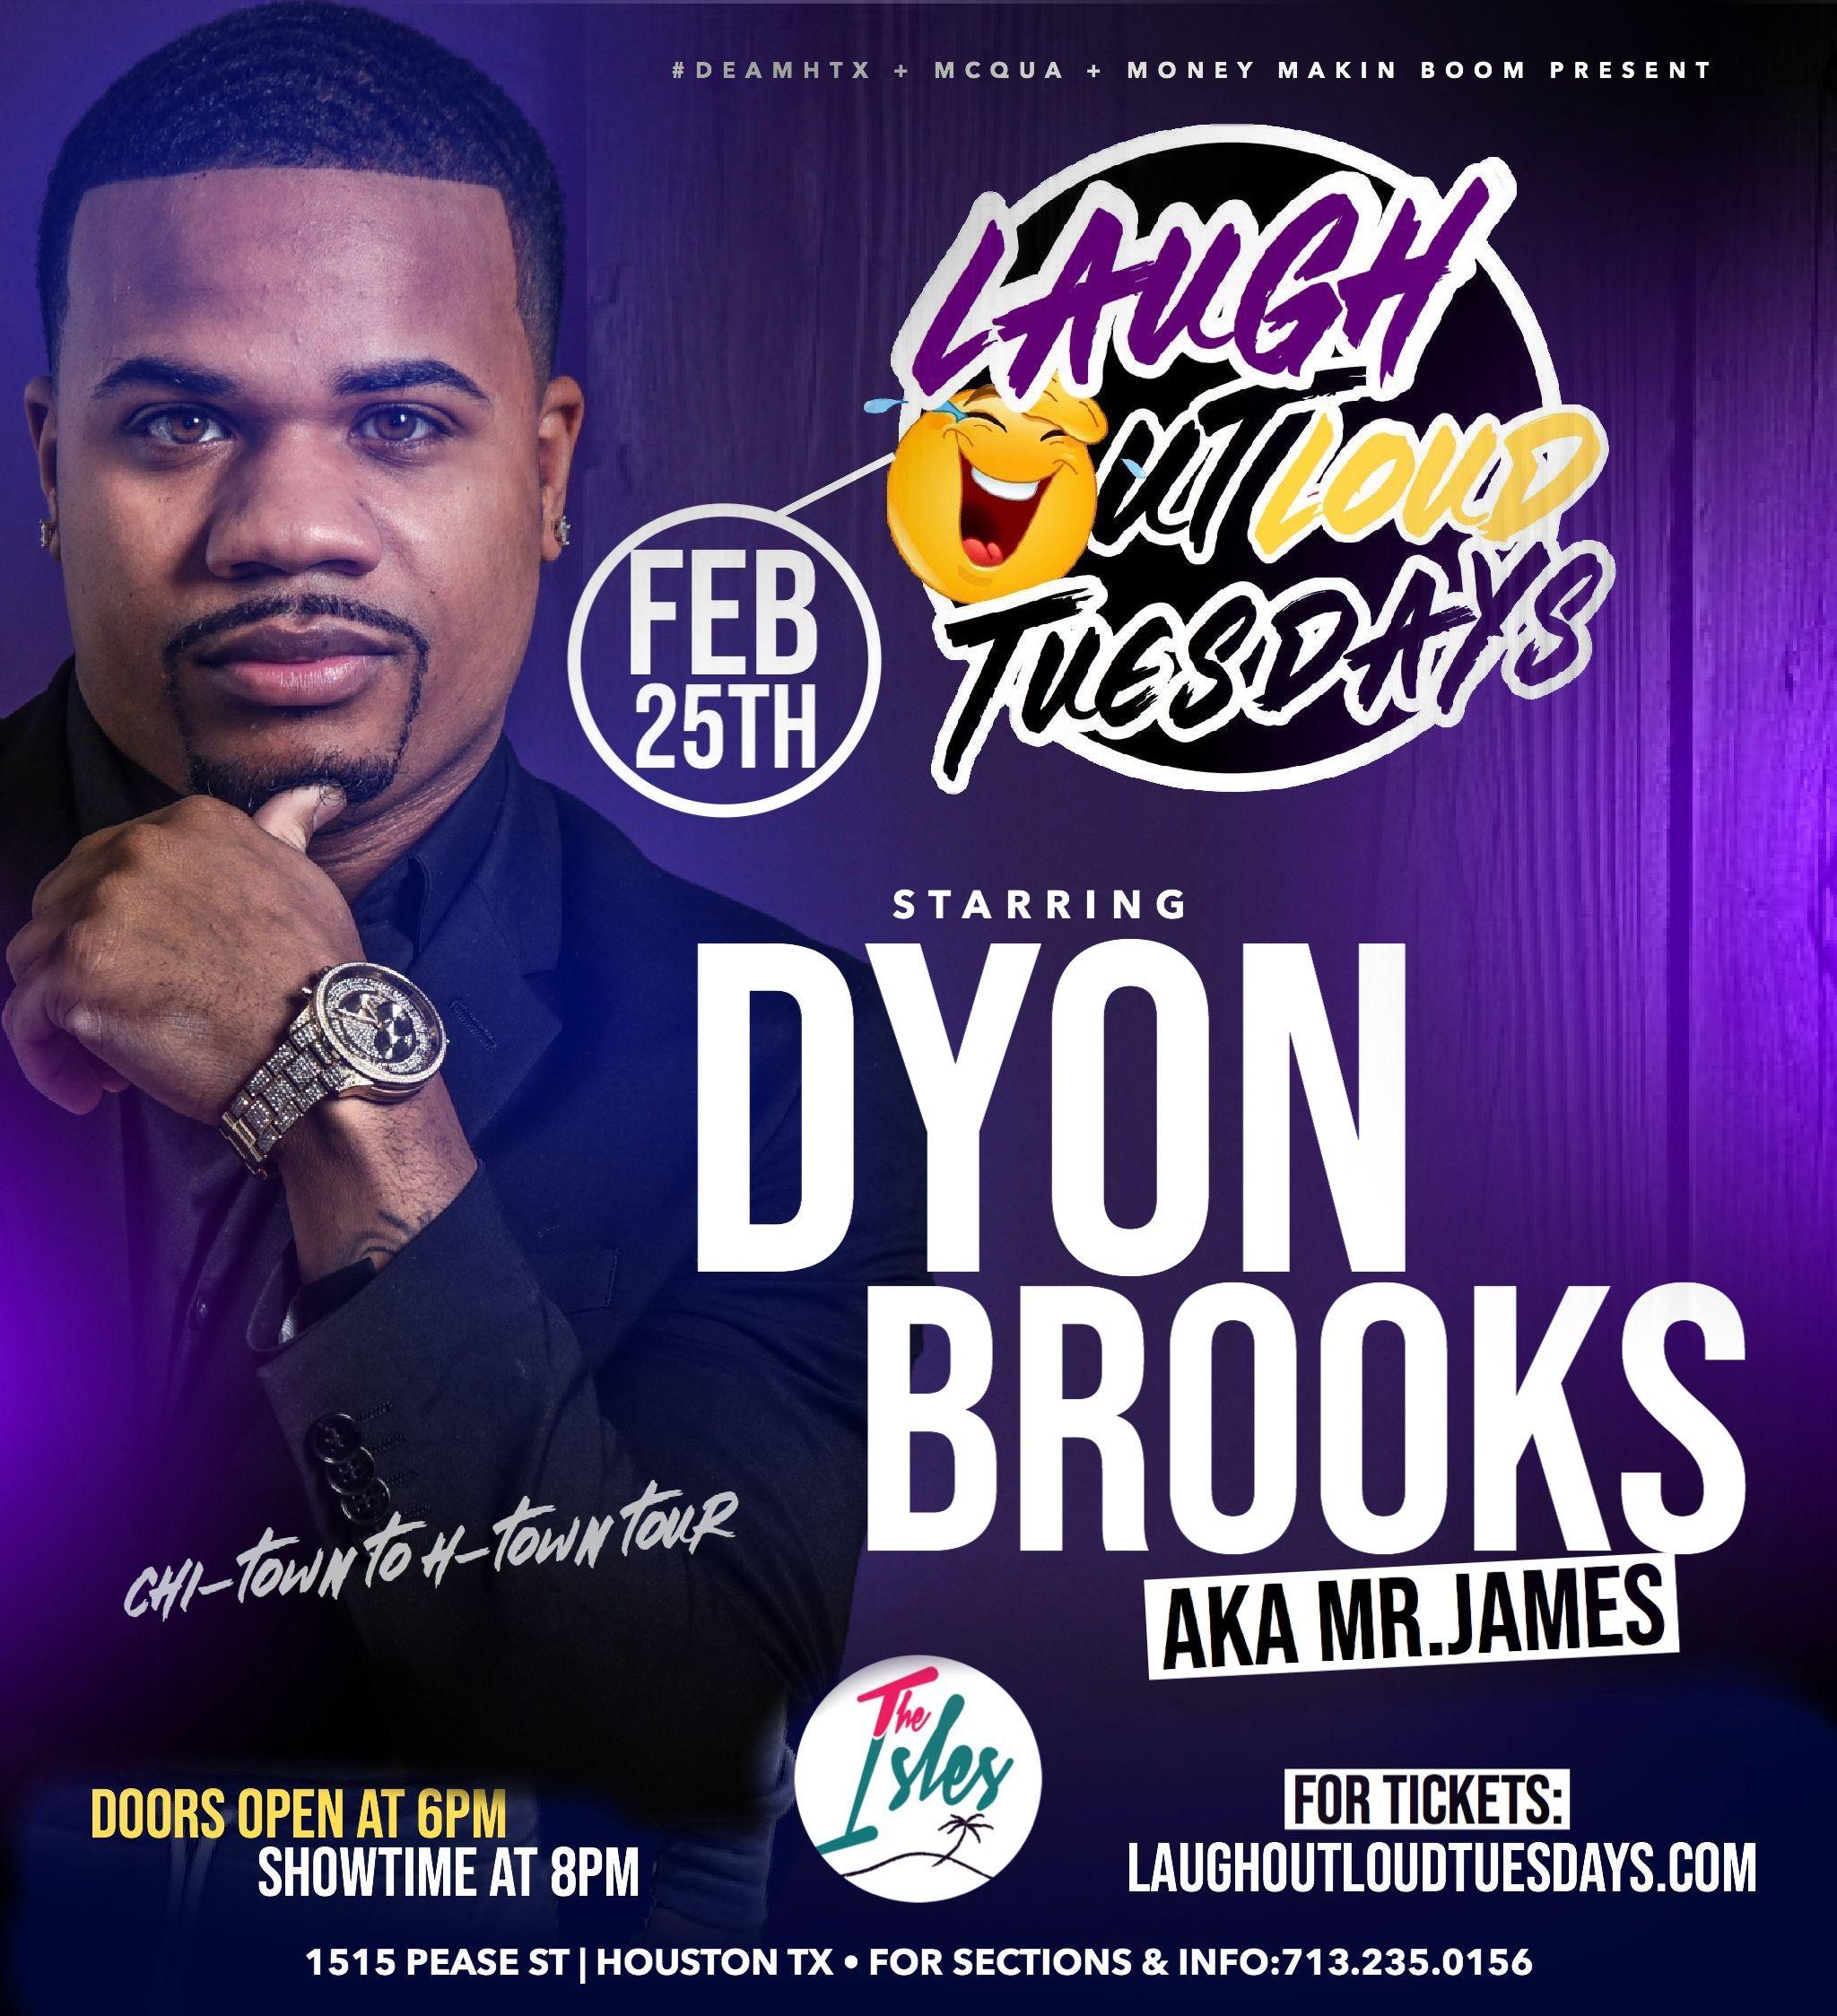 Feb. 25th Doyon Brooks at Laugh Out Loud Tuesday @ Ador 403 W. Gray St